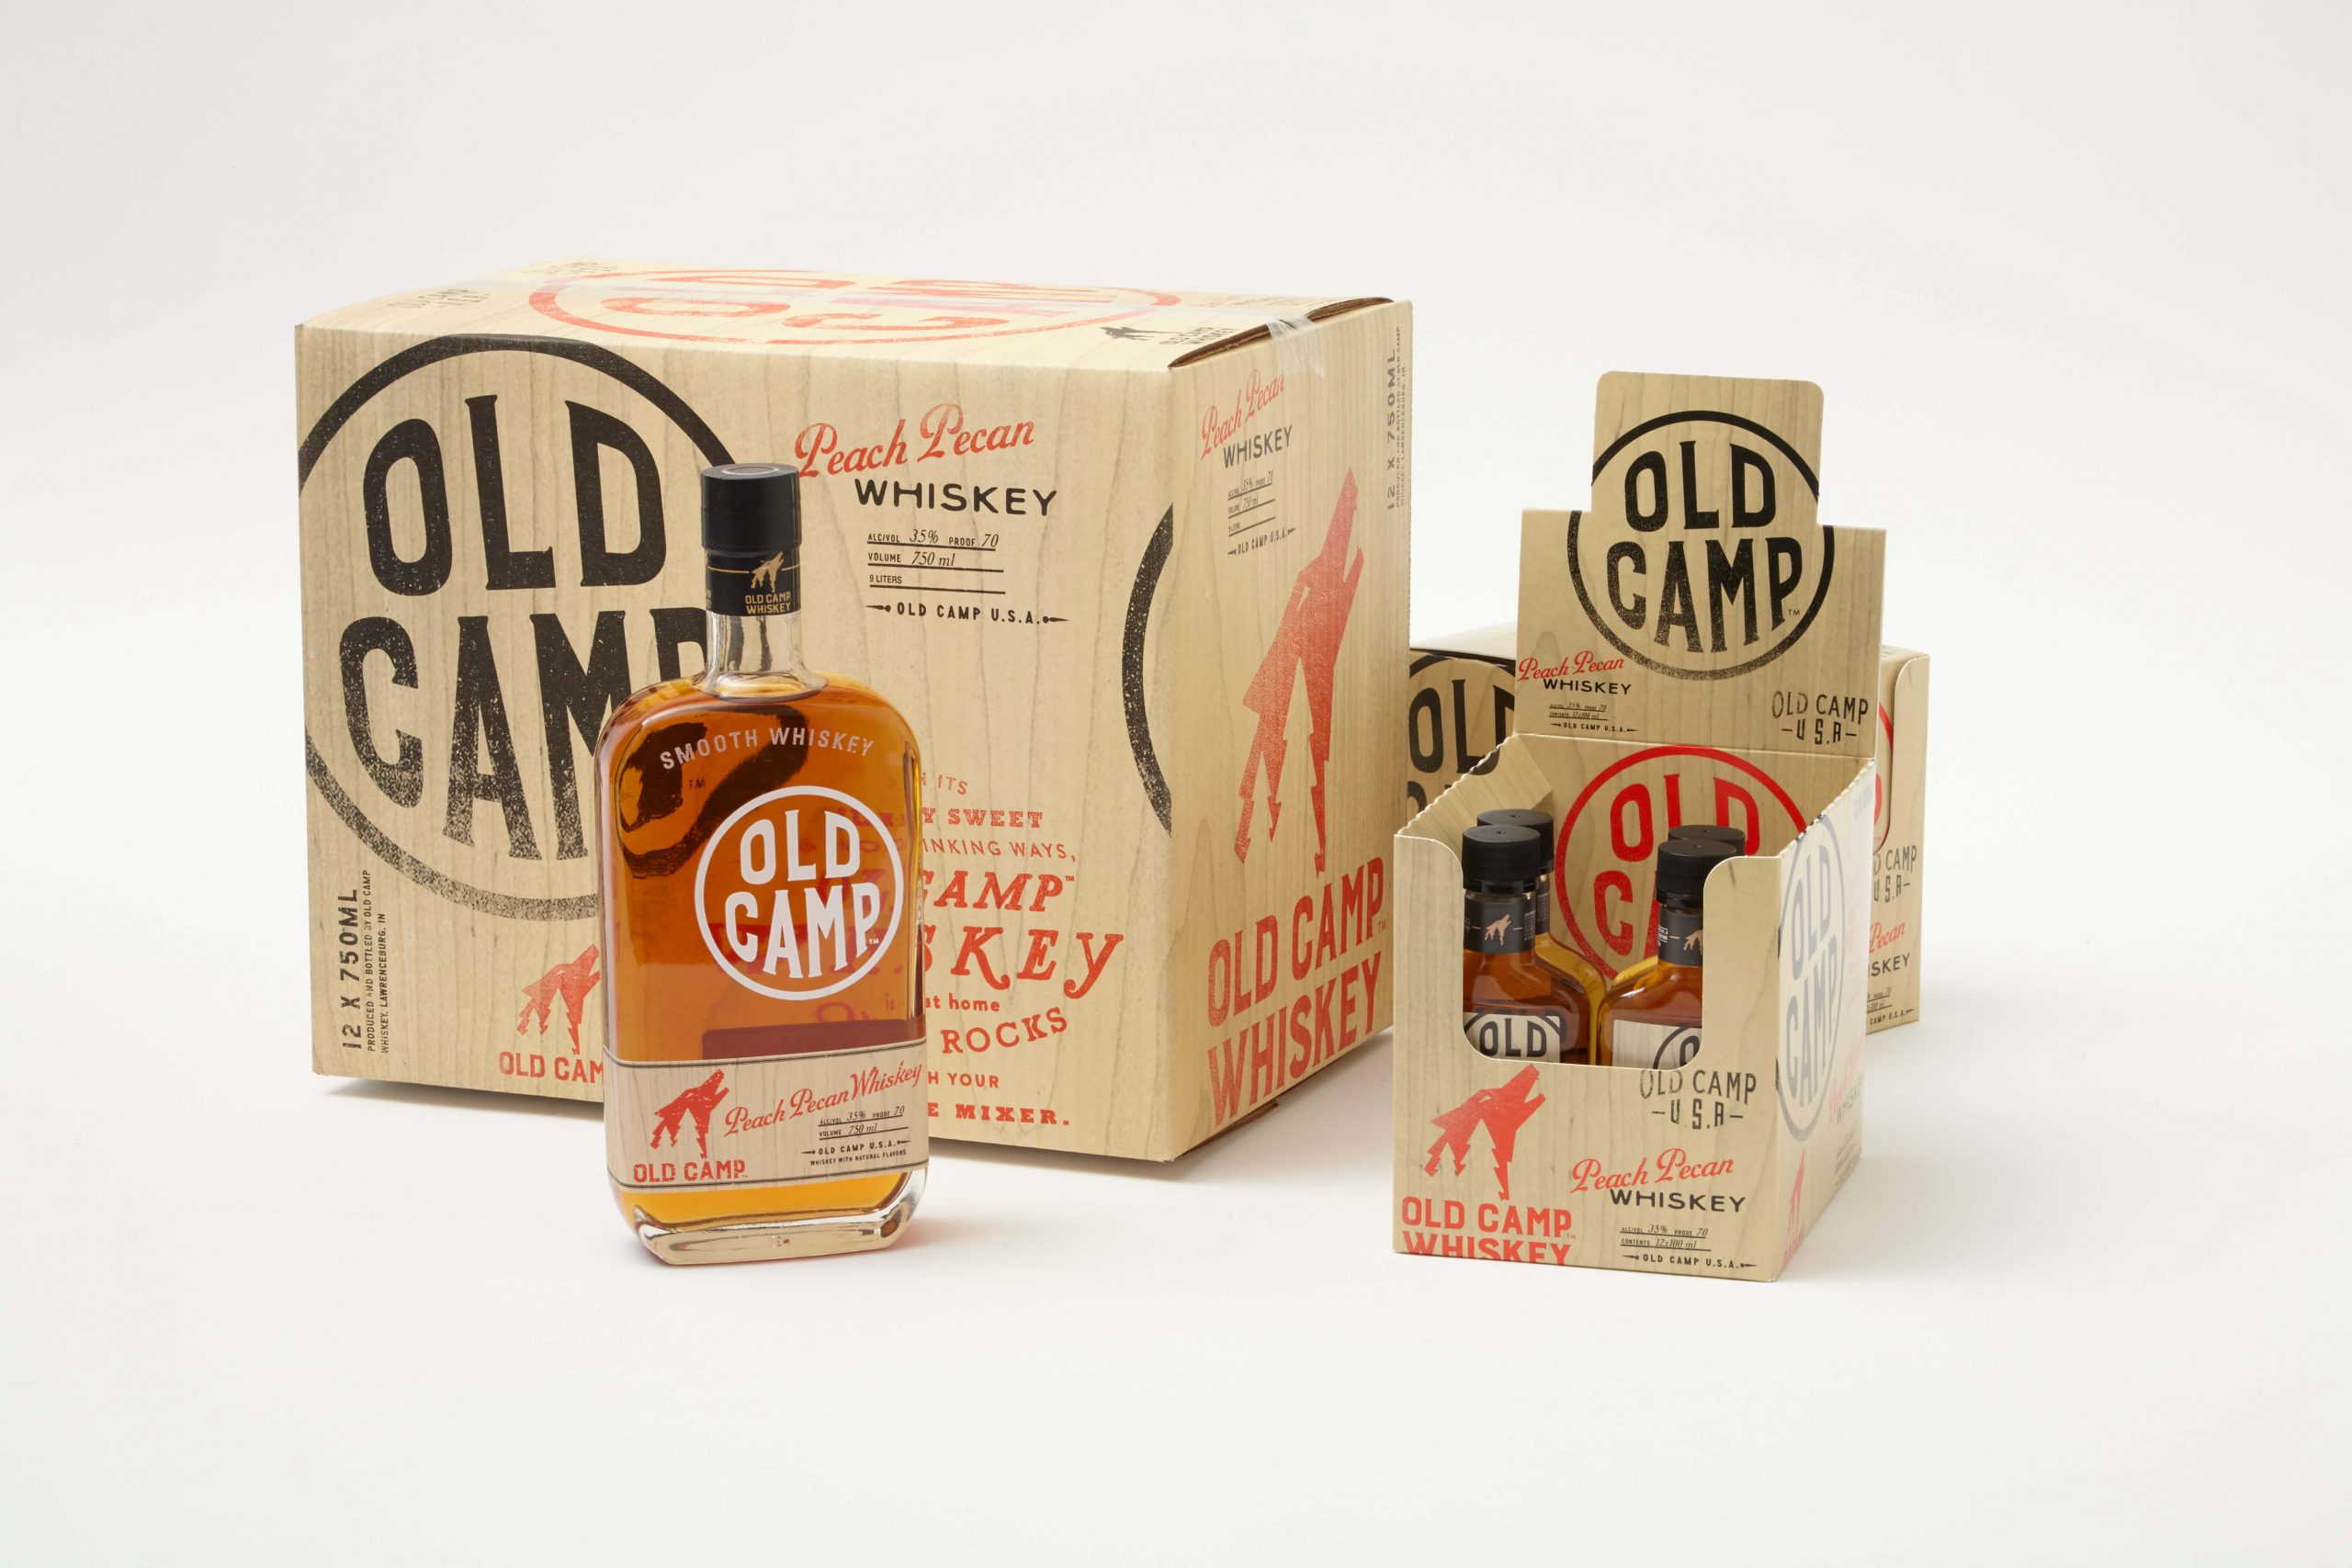 Old Camp bottle and box packaging